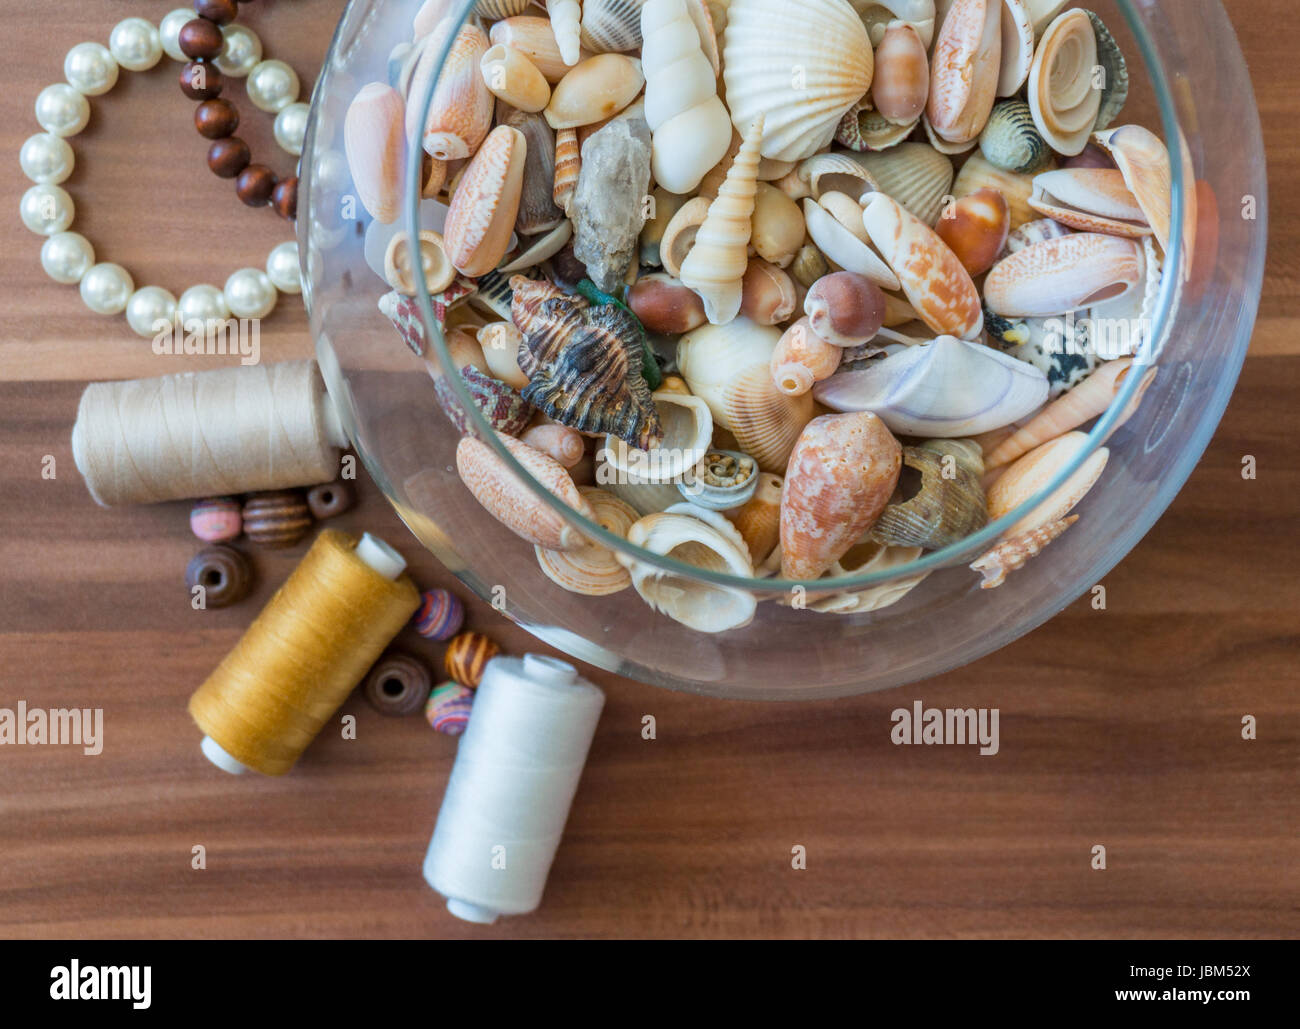 Bowl of seashells with pearls, beads and thread nearby Stock Photo